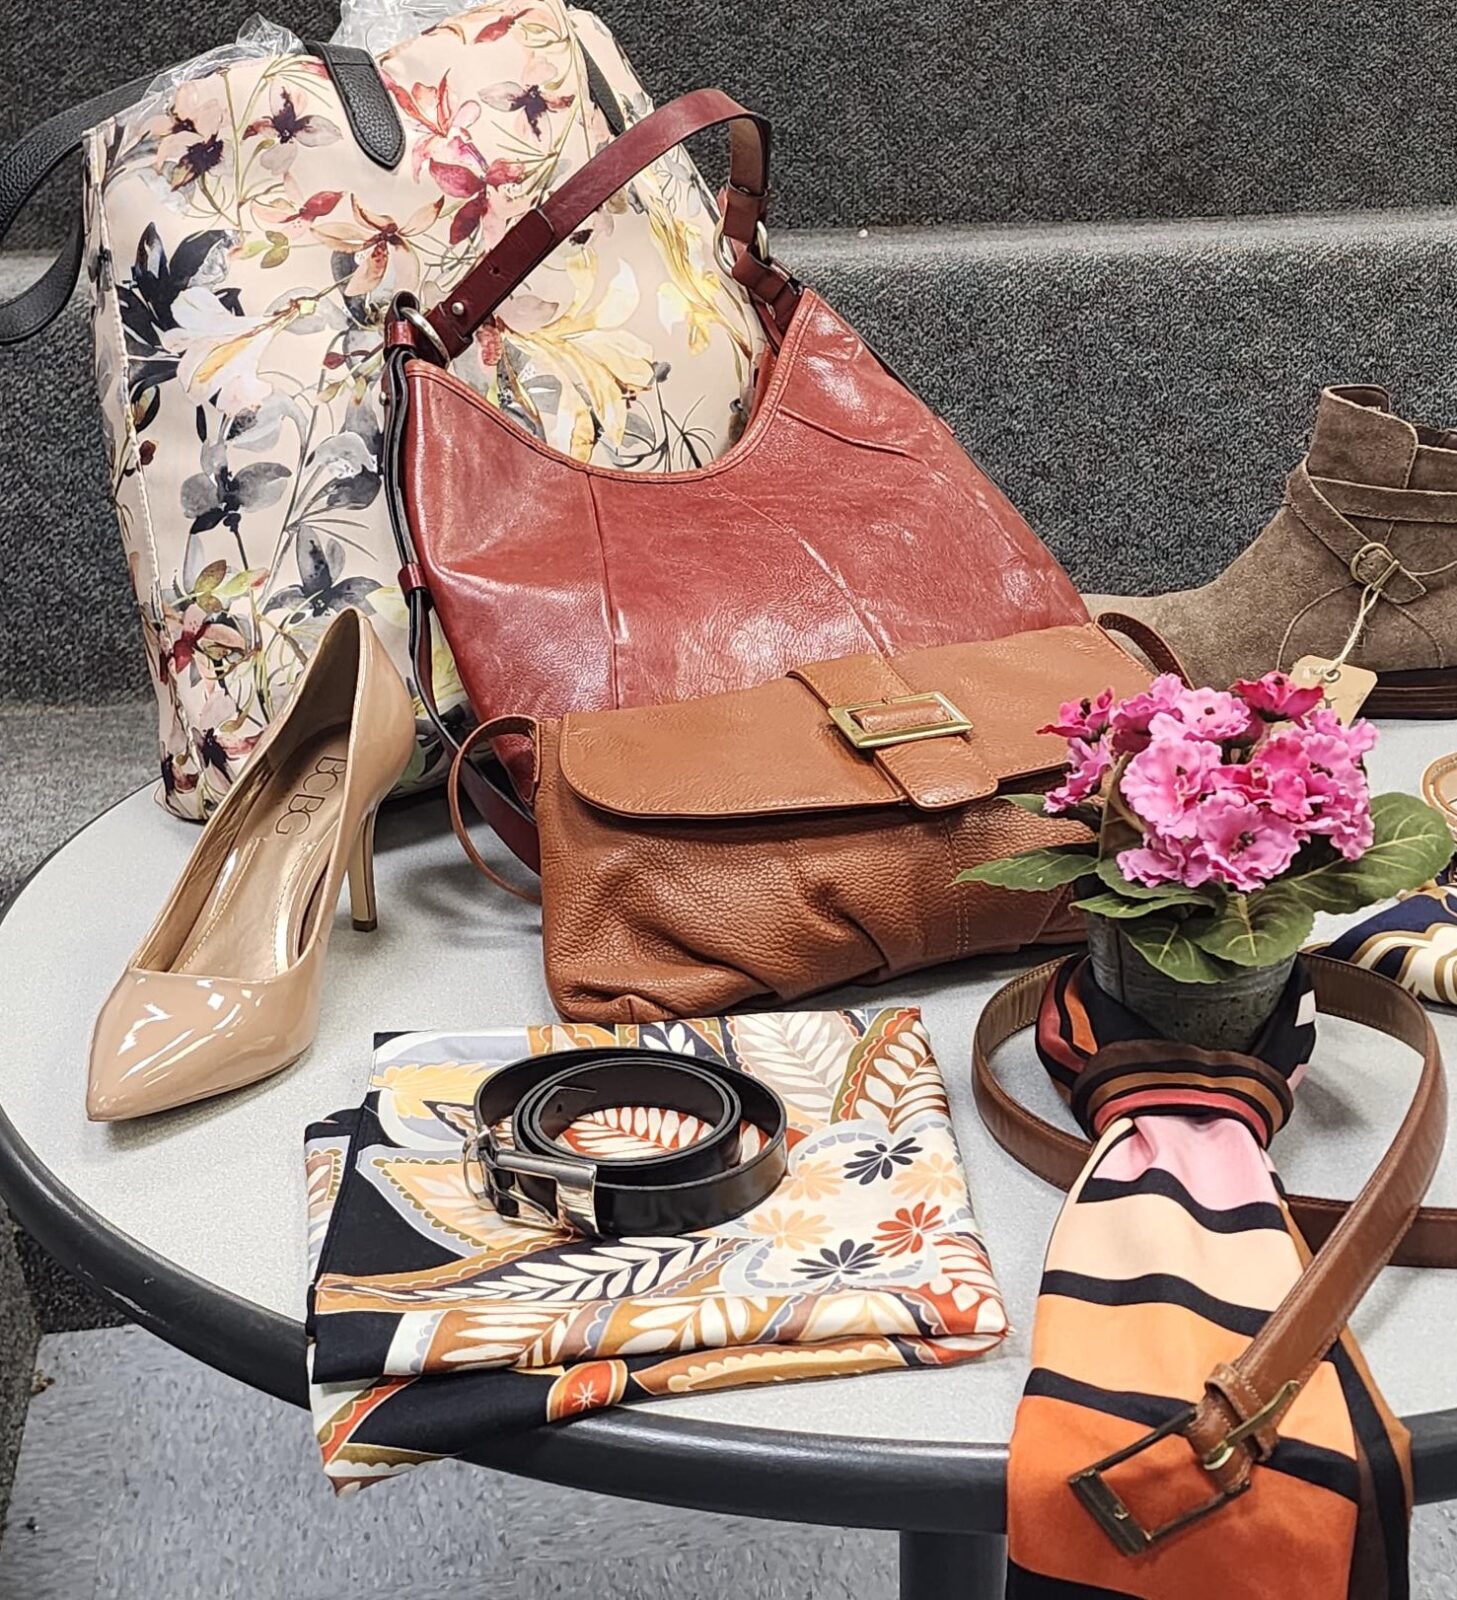 Women's purses, shoes, and accessories at the Career Closet